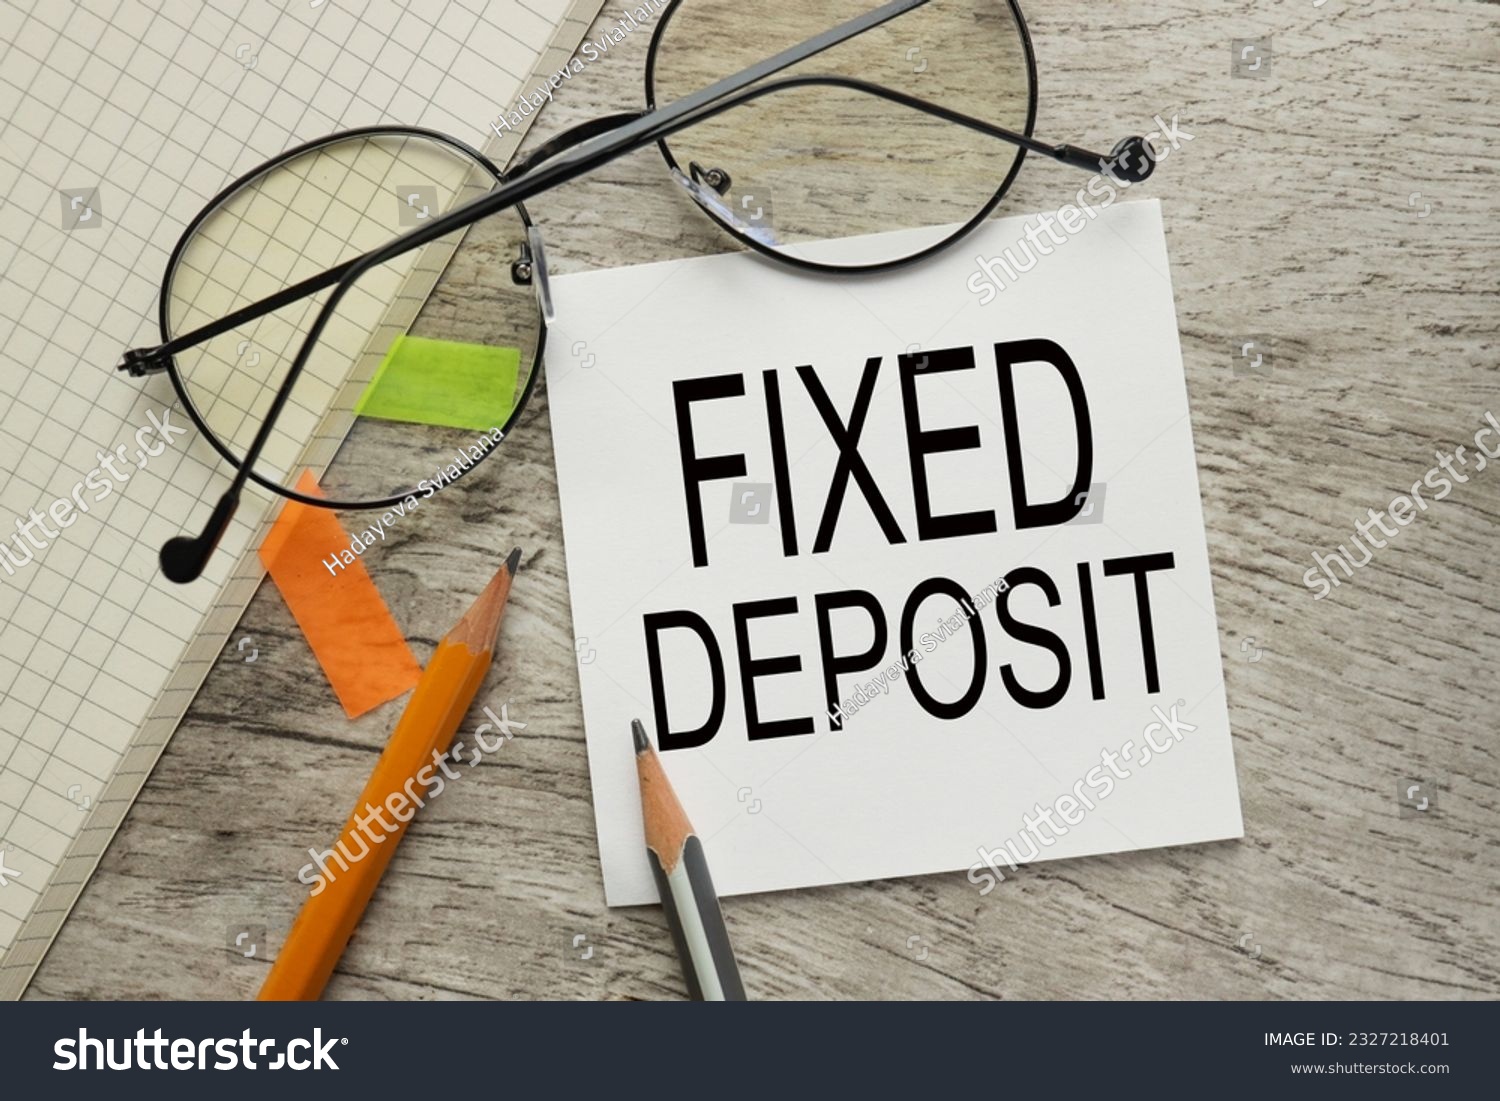 Fixed Deposit workspace with text on white sticker. #2327218401